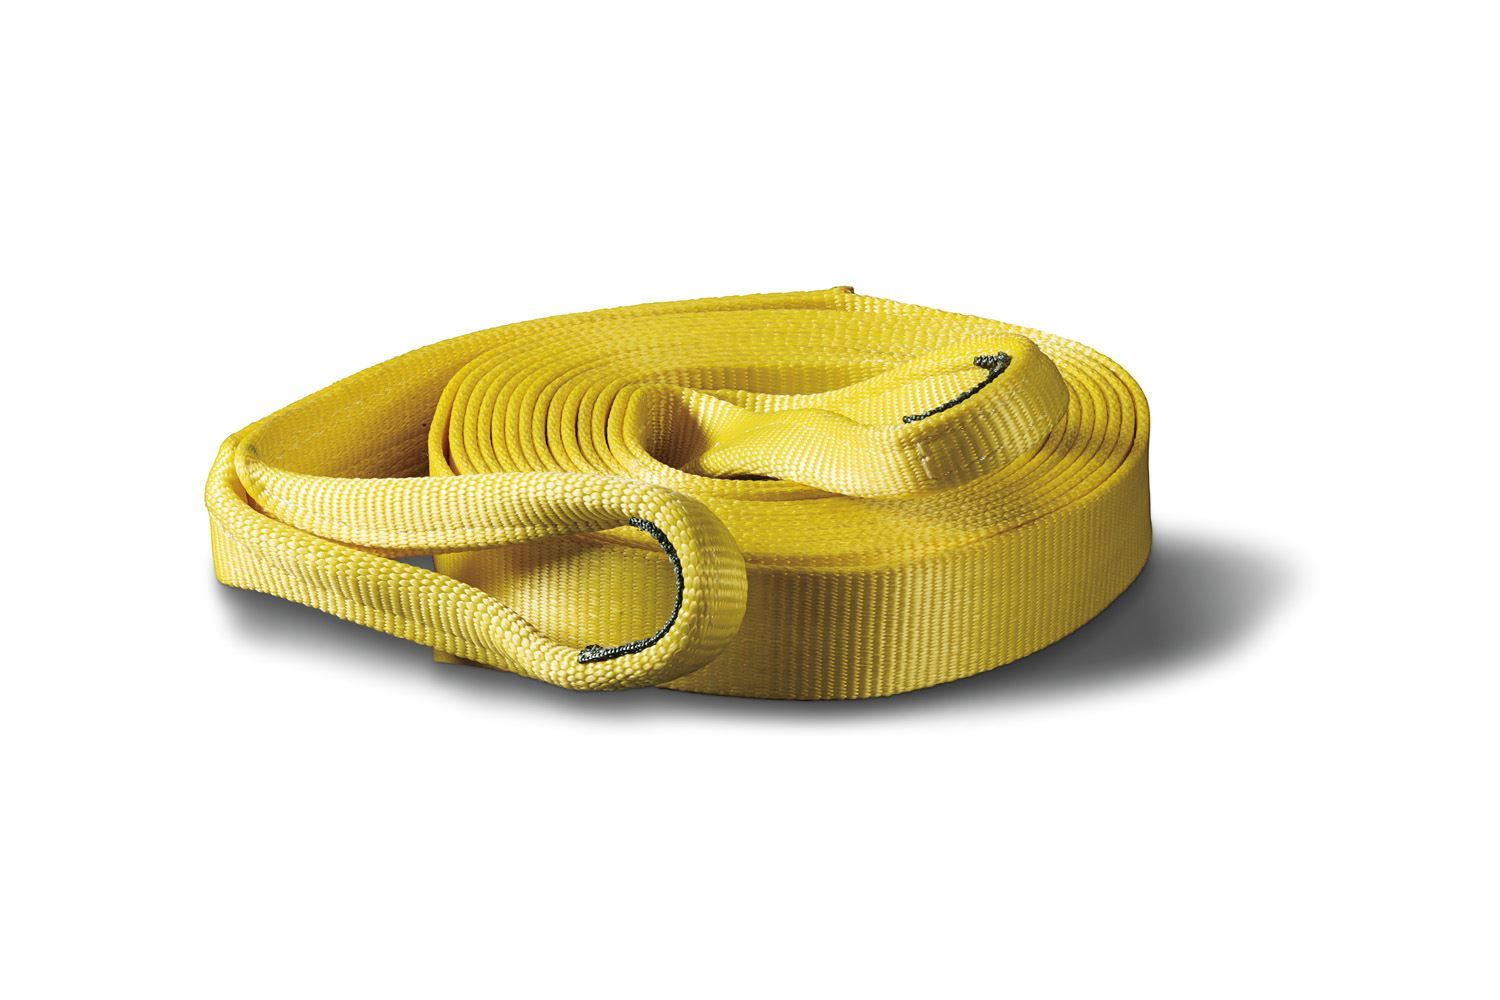 WARN Industrial Recovery Strap - 30ft x 2in, Yellow